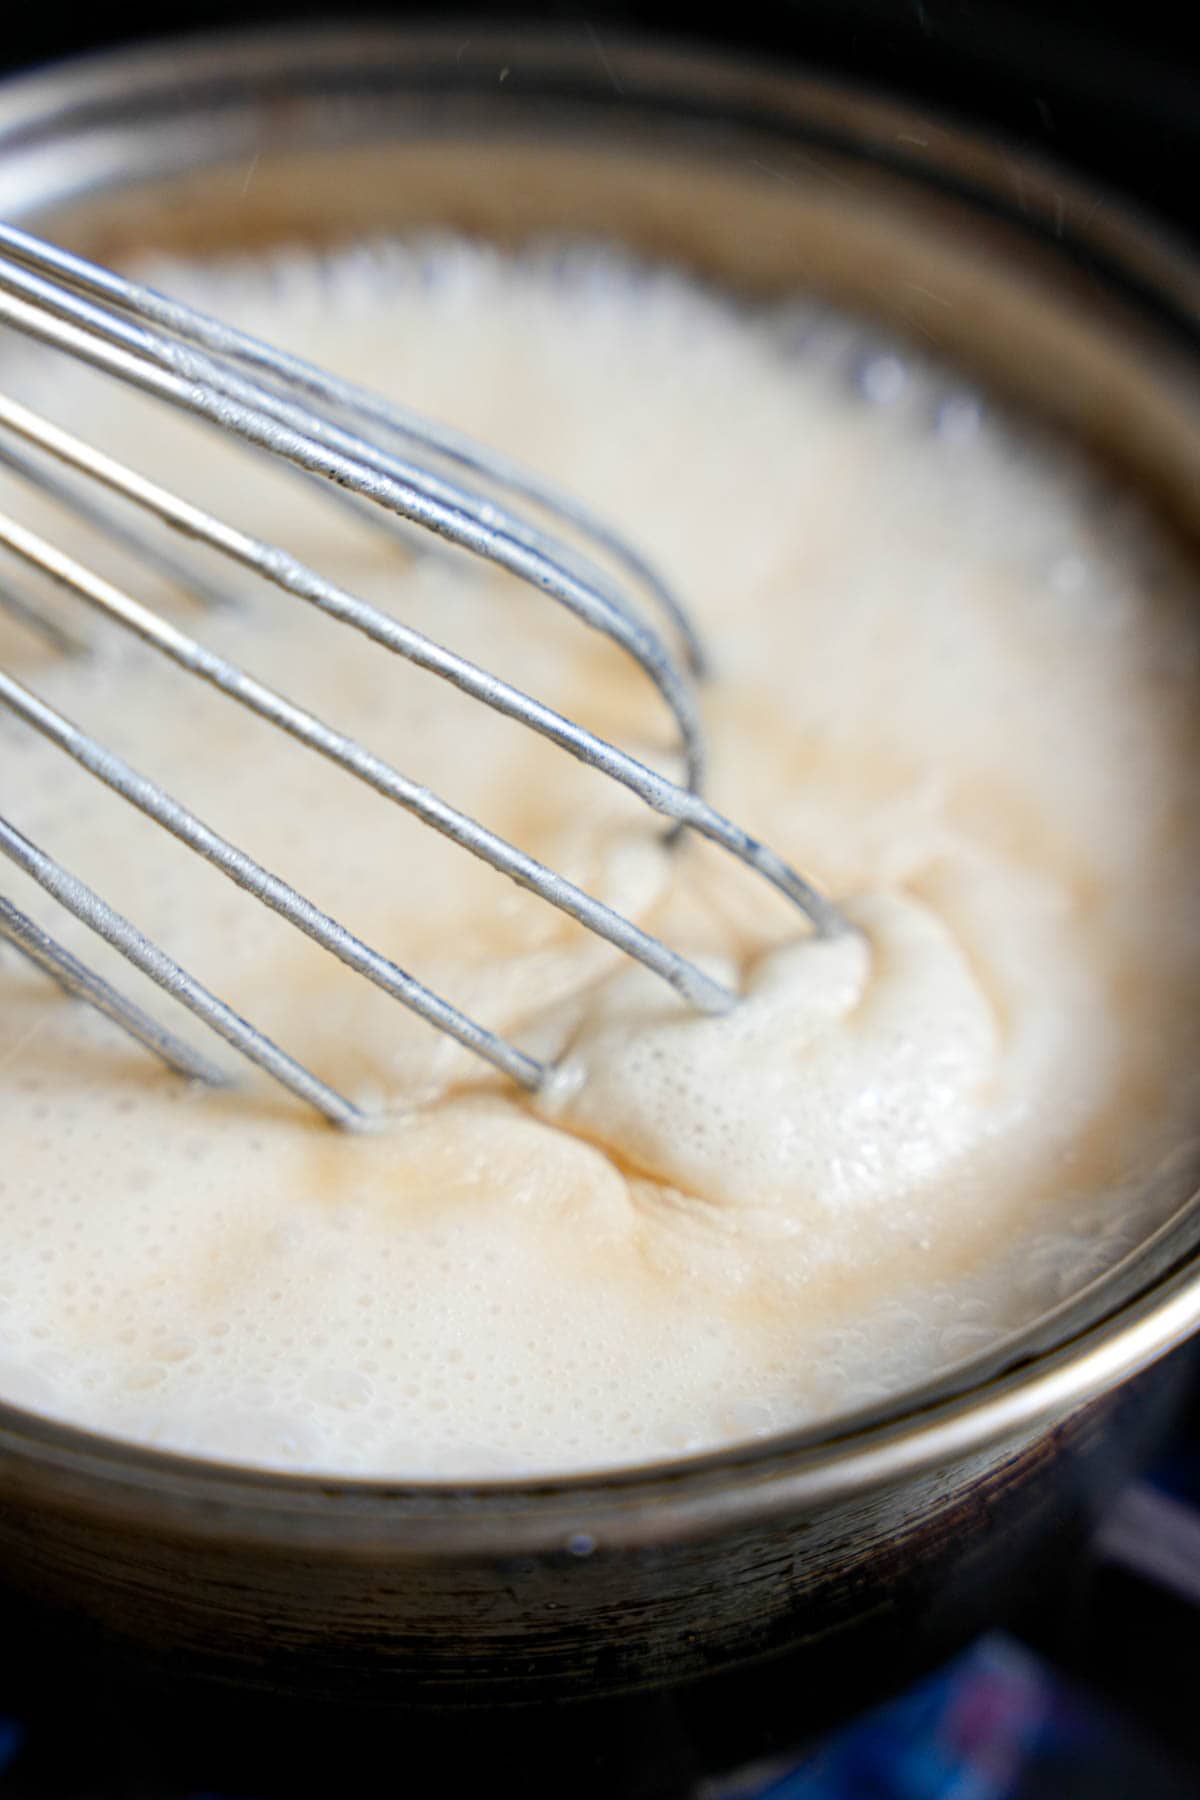 The custard is mixed until bubbling in a saucepan with a whisk.